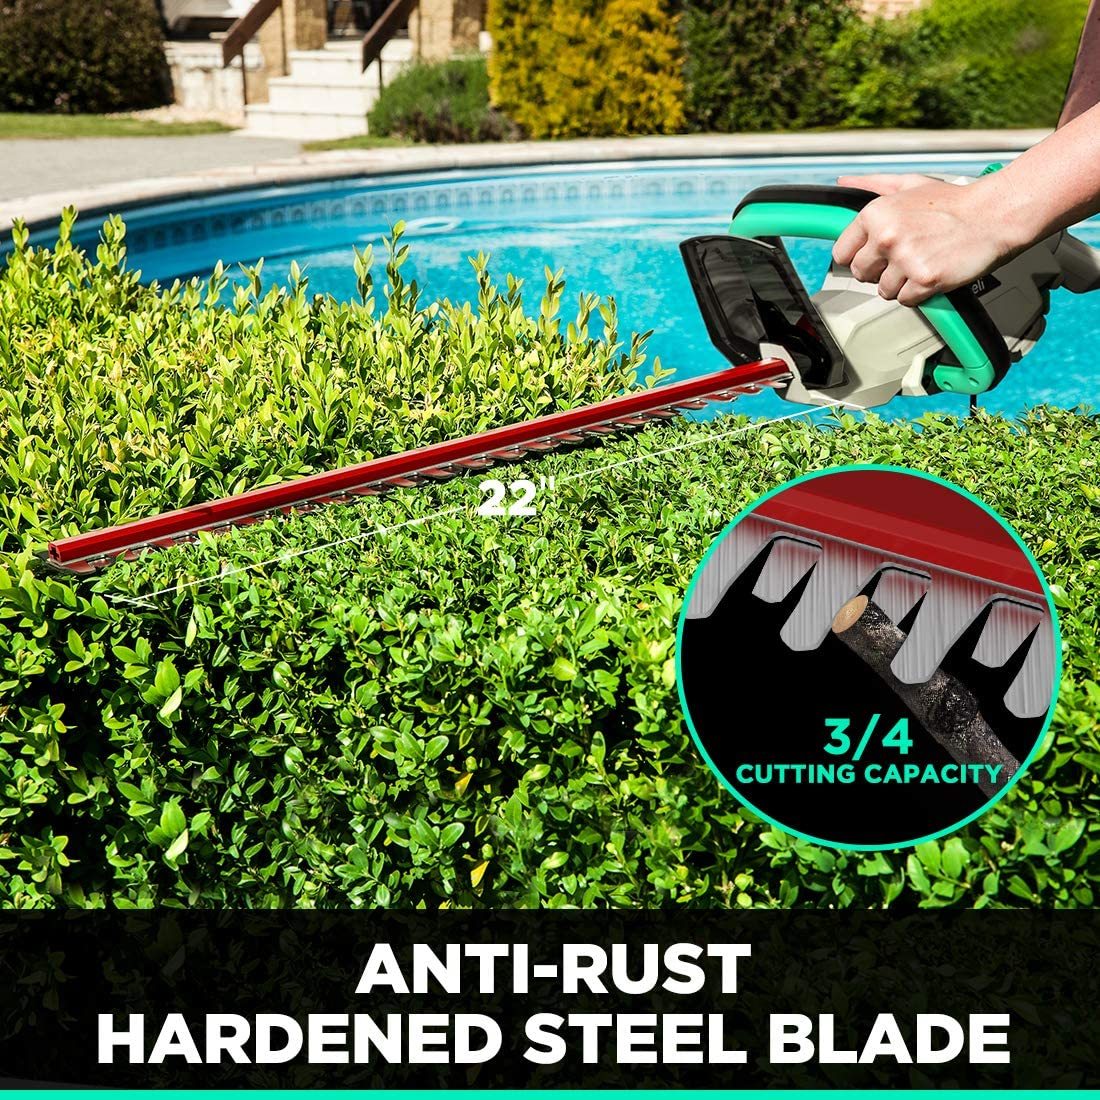 Litheli Cordless Hedge Trimmer 22″, 40V and similar items